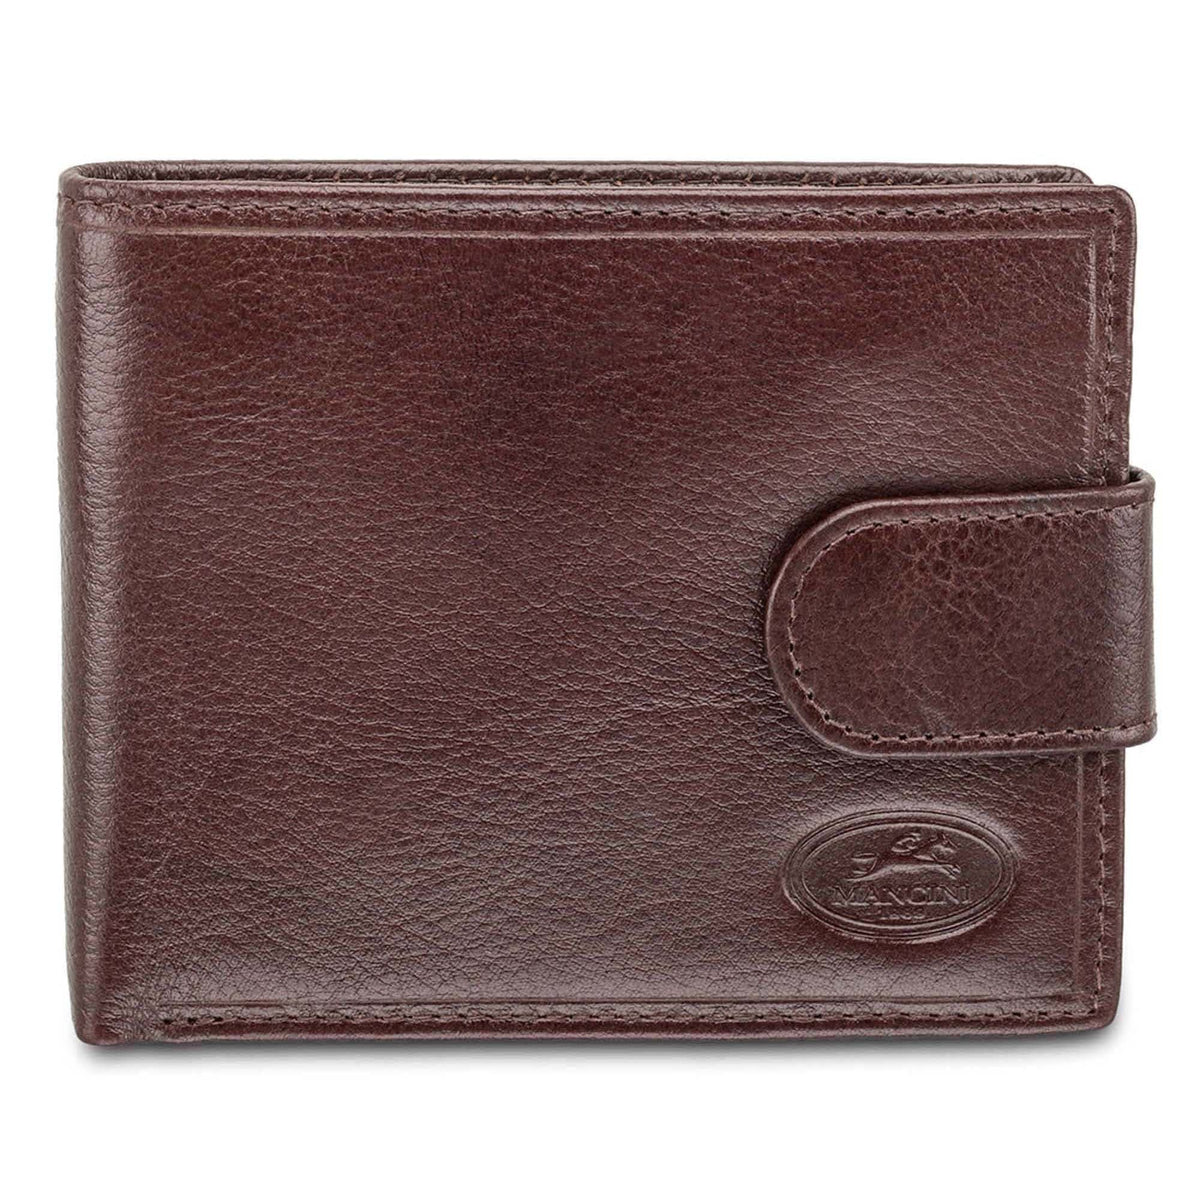 Mancini Deluxe Men's Wallet With Coin Pocket